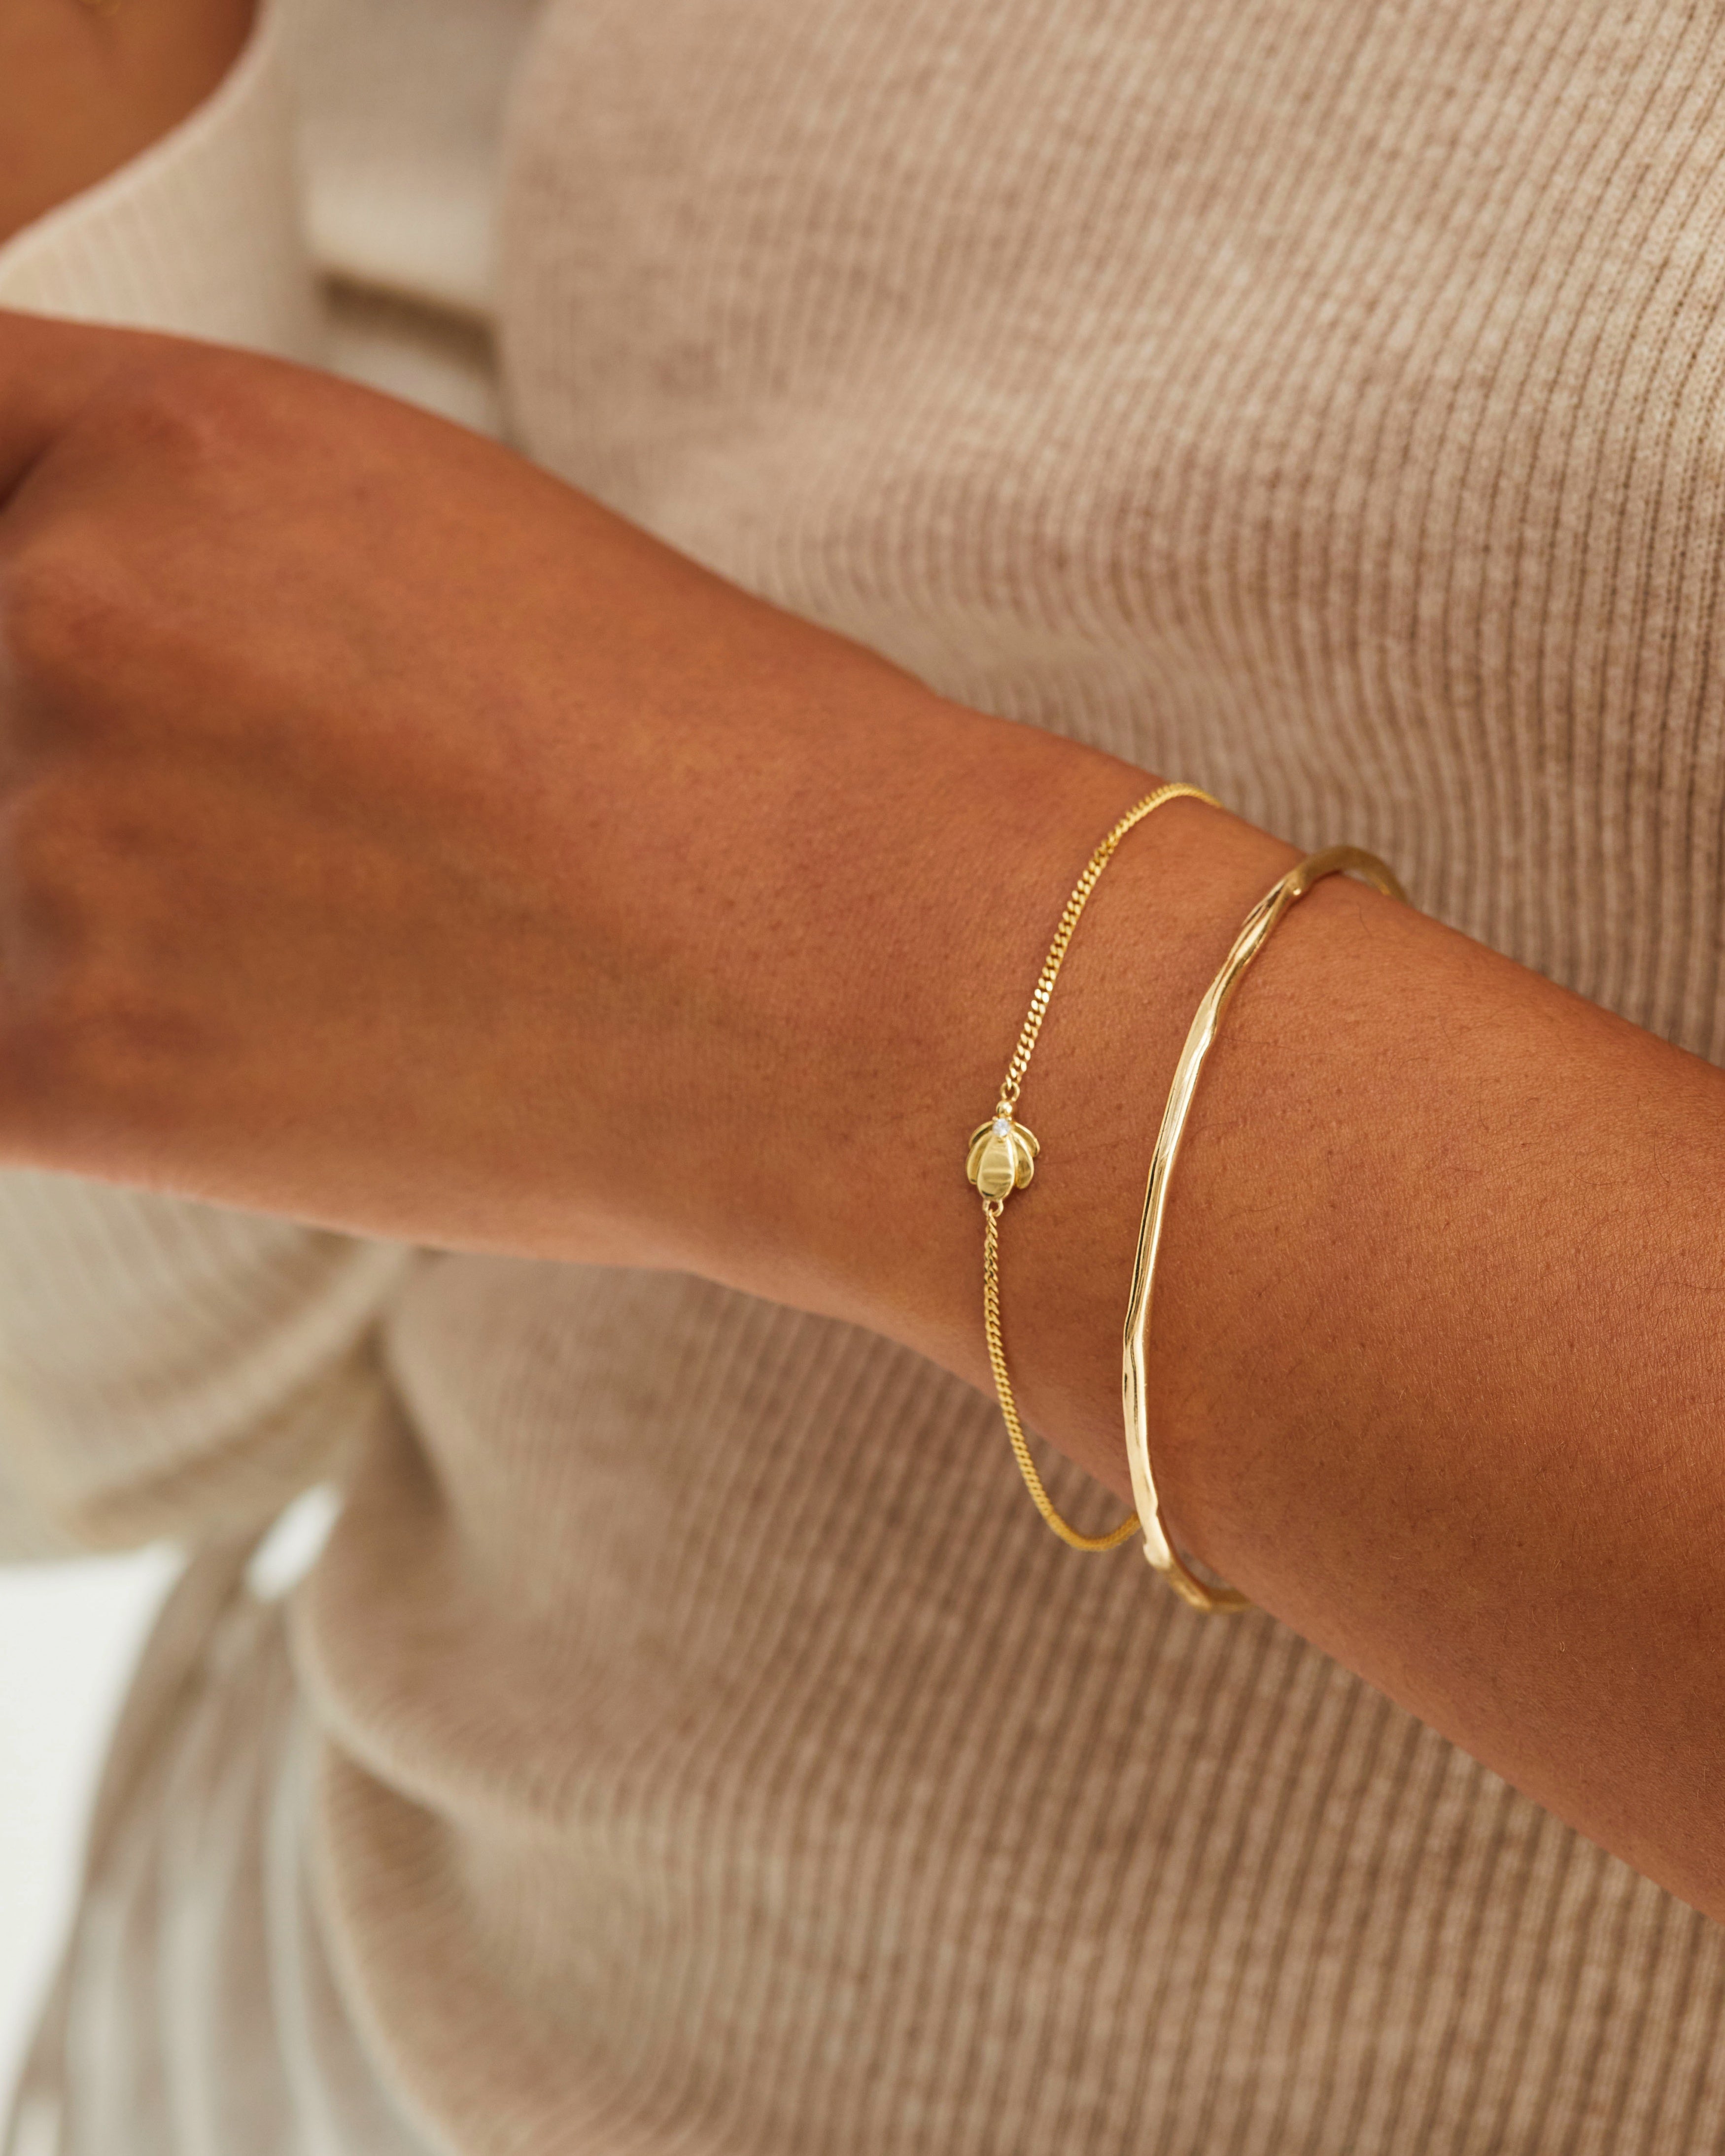 A woman wearing the Aeris Bracelet | Diamond and the Organic Bangle, both in yellow gold.